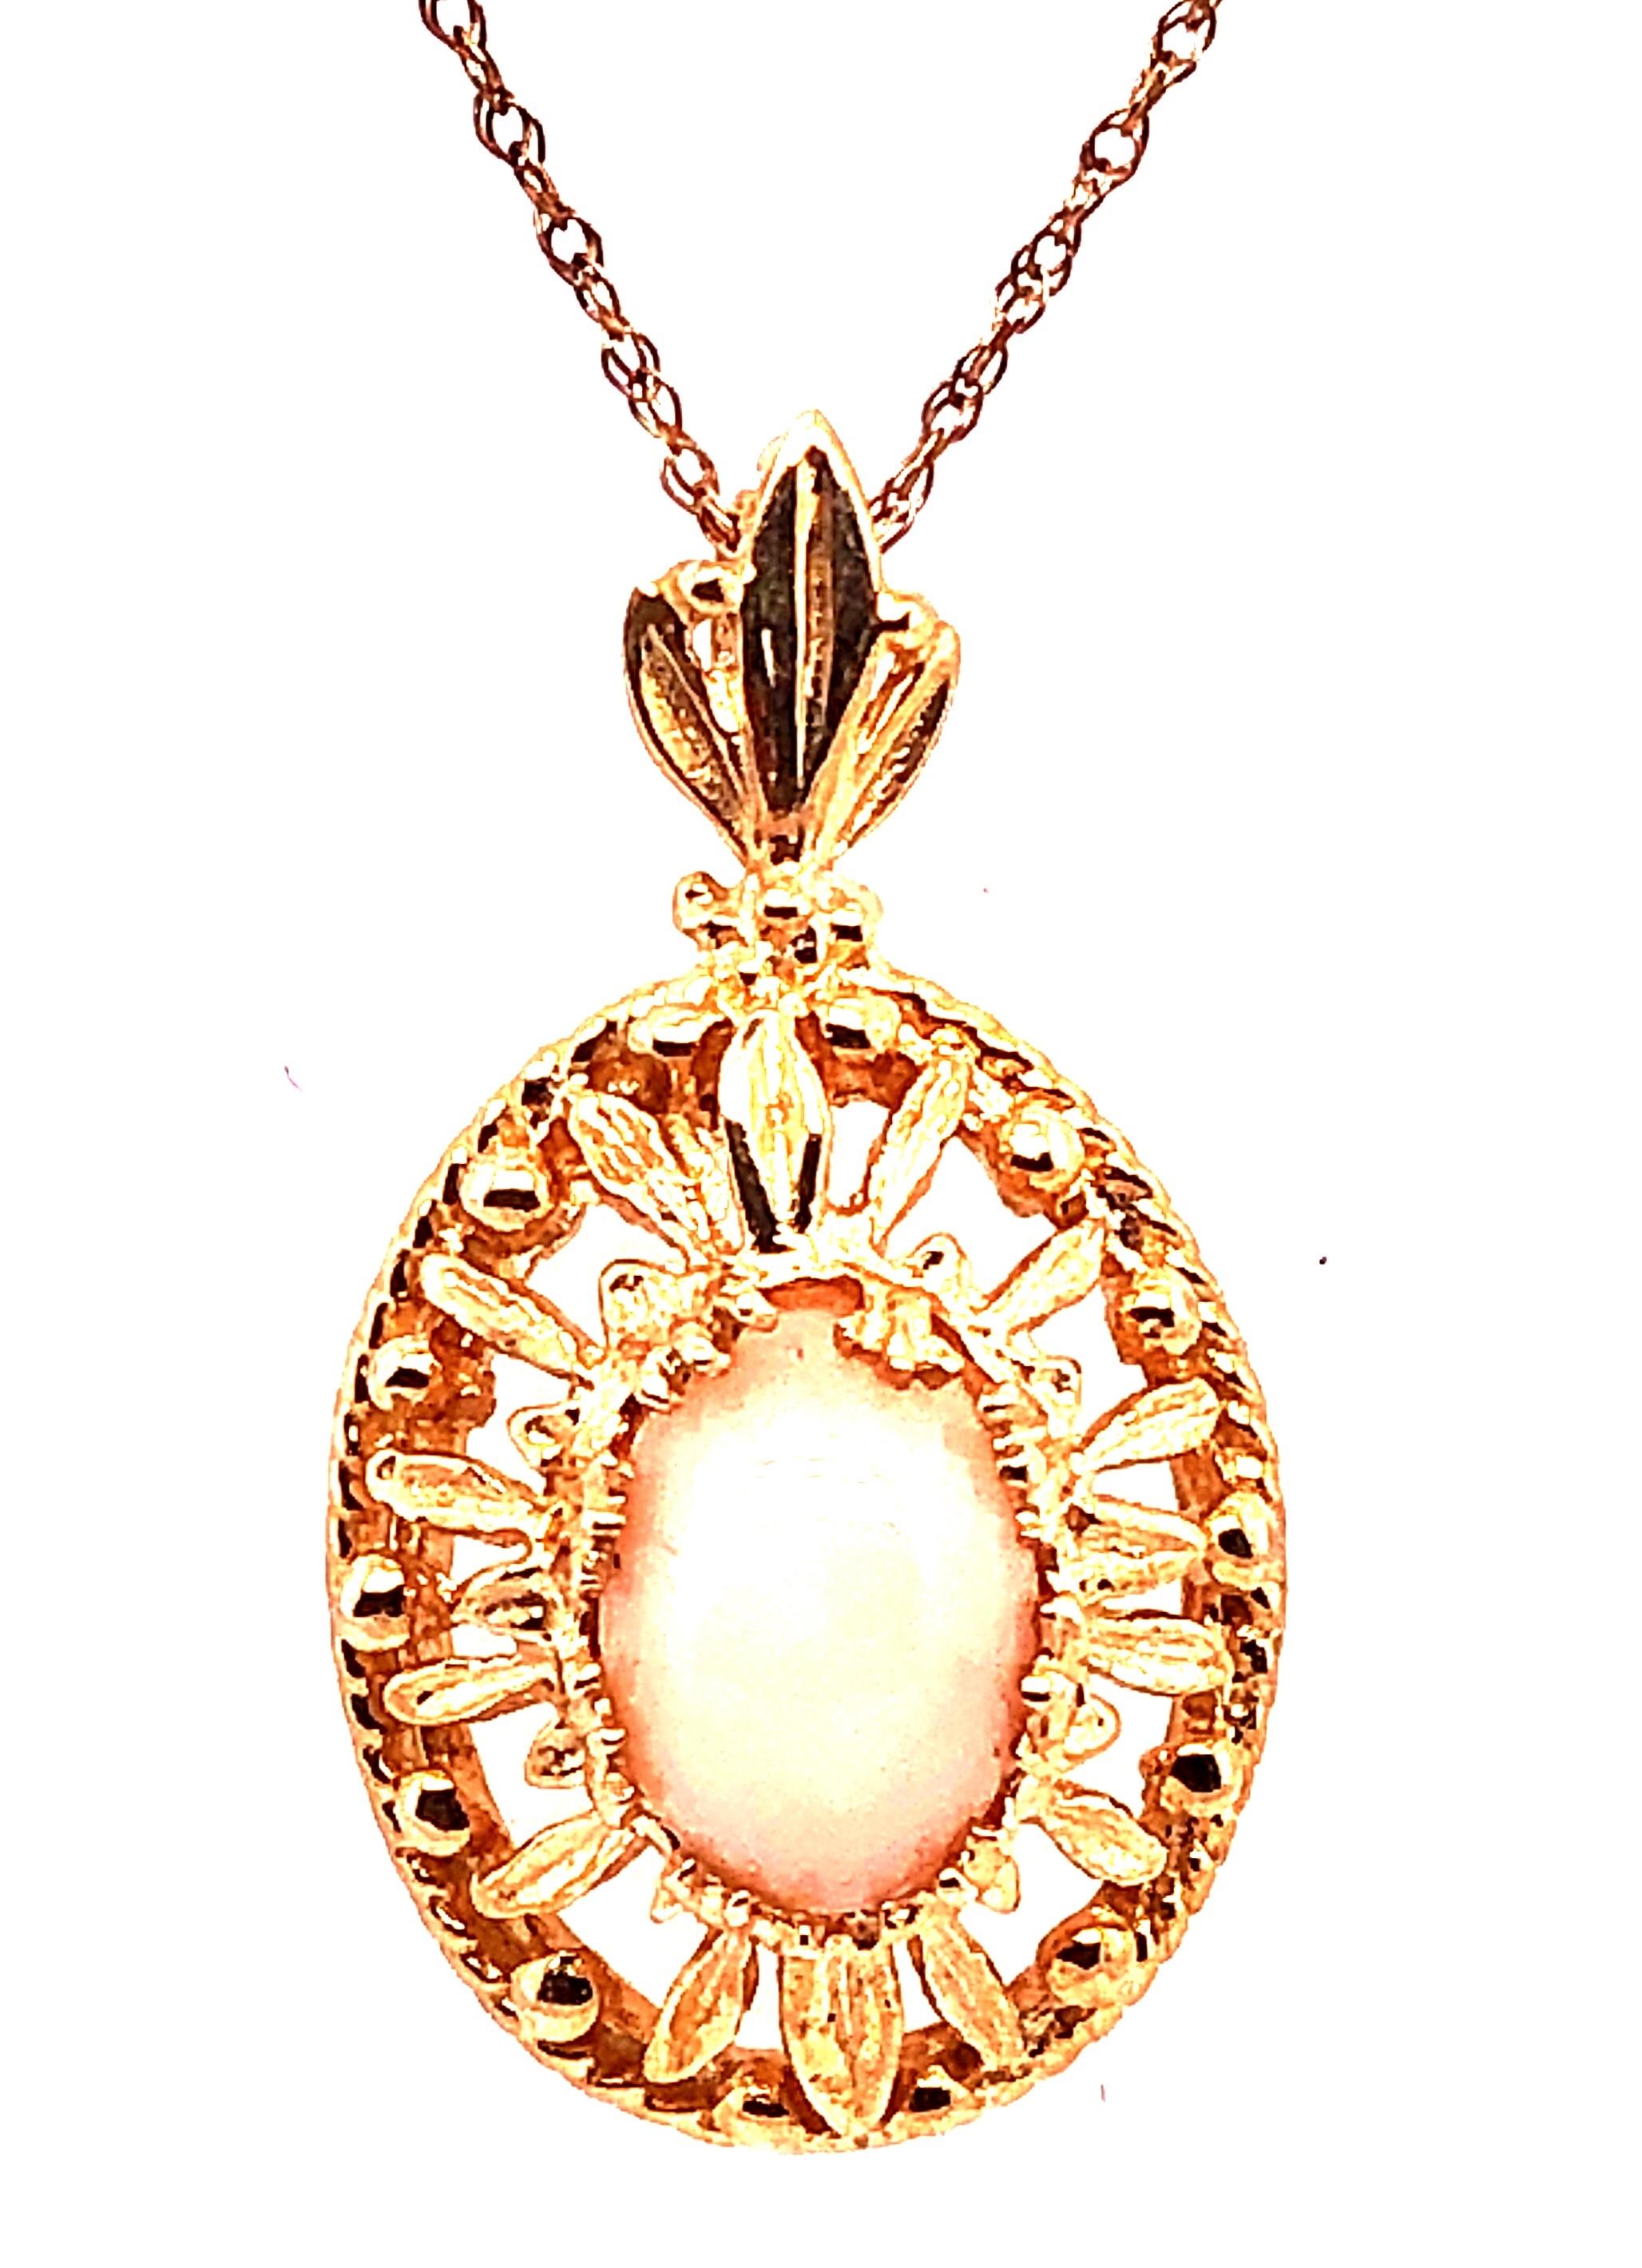 14 Karat Yellow Gold 18 Inch Necklace with Pendant. Stone, most likely Rose Quartz is 7.75mm by 6mm. 
3.68 grams total weight. Pendant stamped 14K